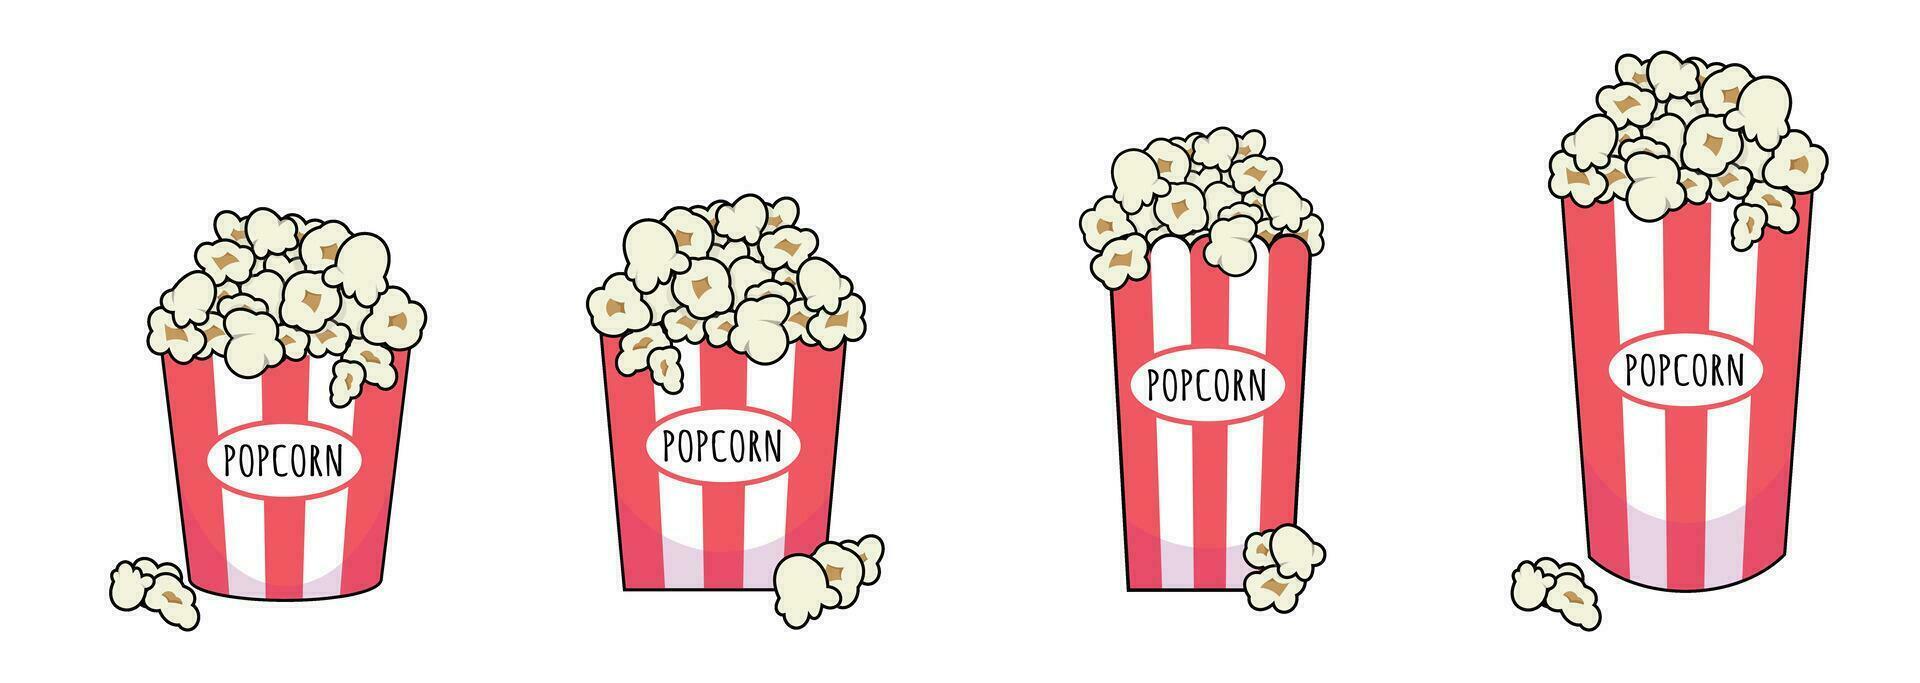 pop corn snack for movie made from corn served in paper box vector